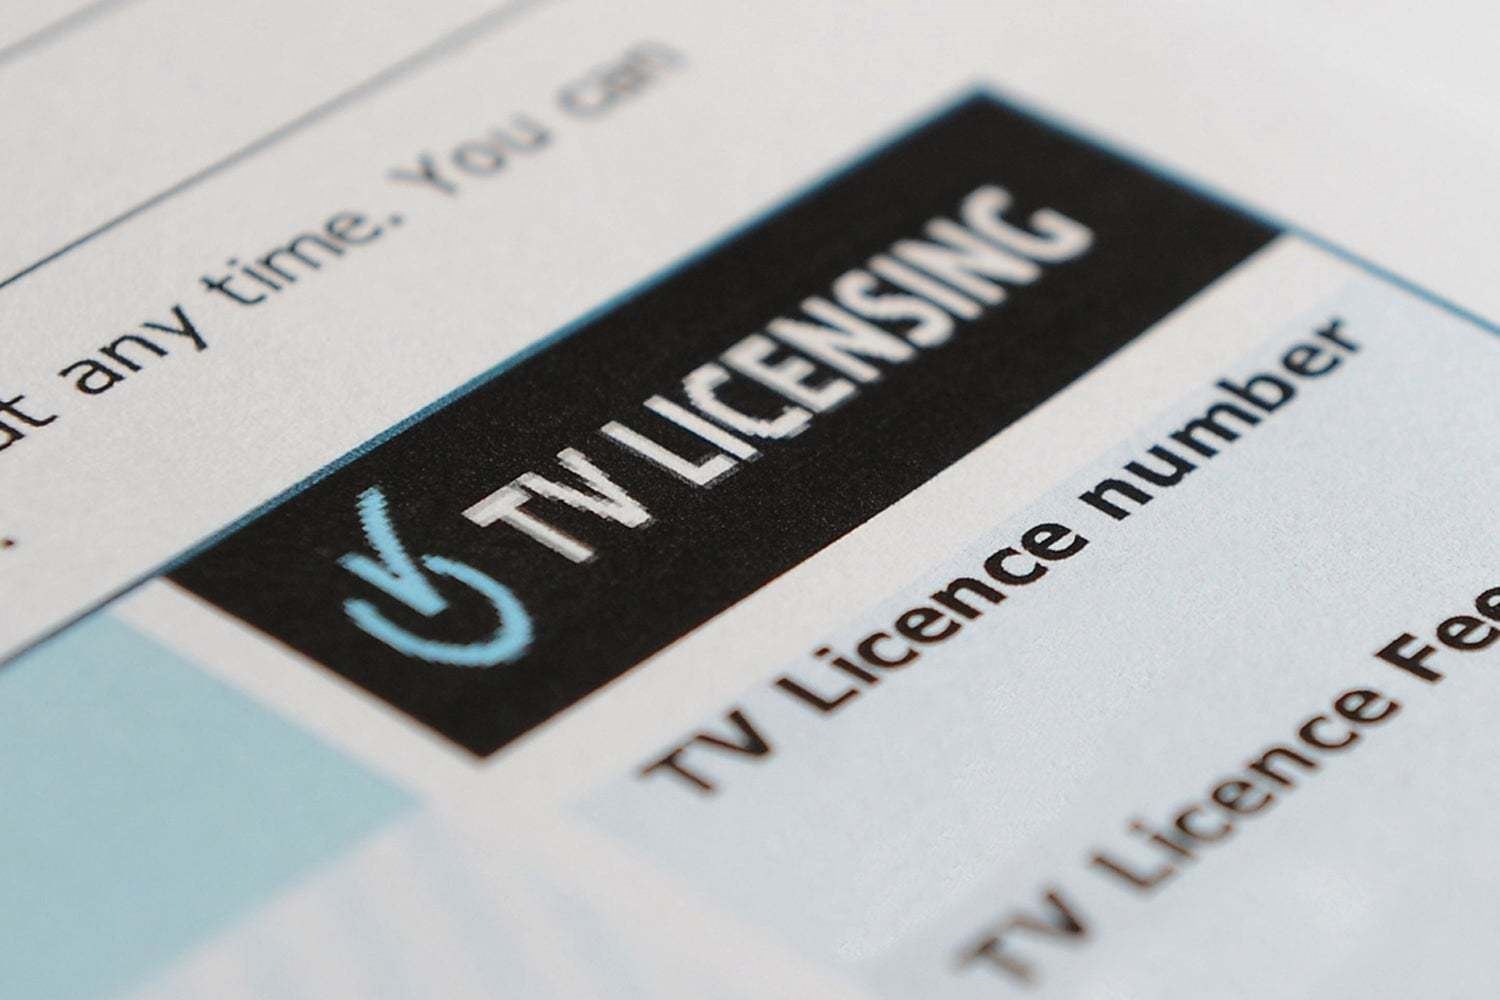 The BBC says the TV licence change is the only way to head off cuts.